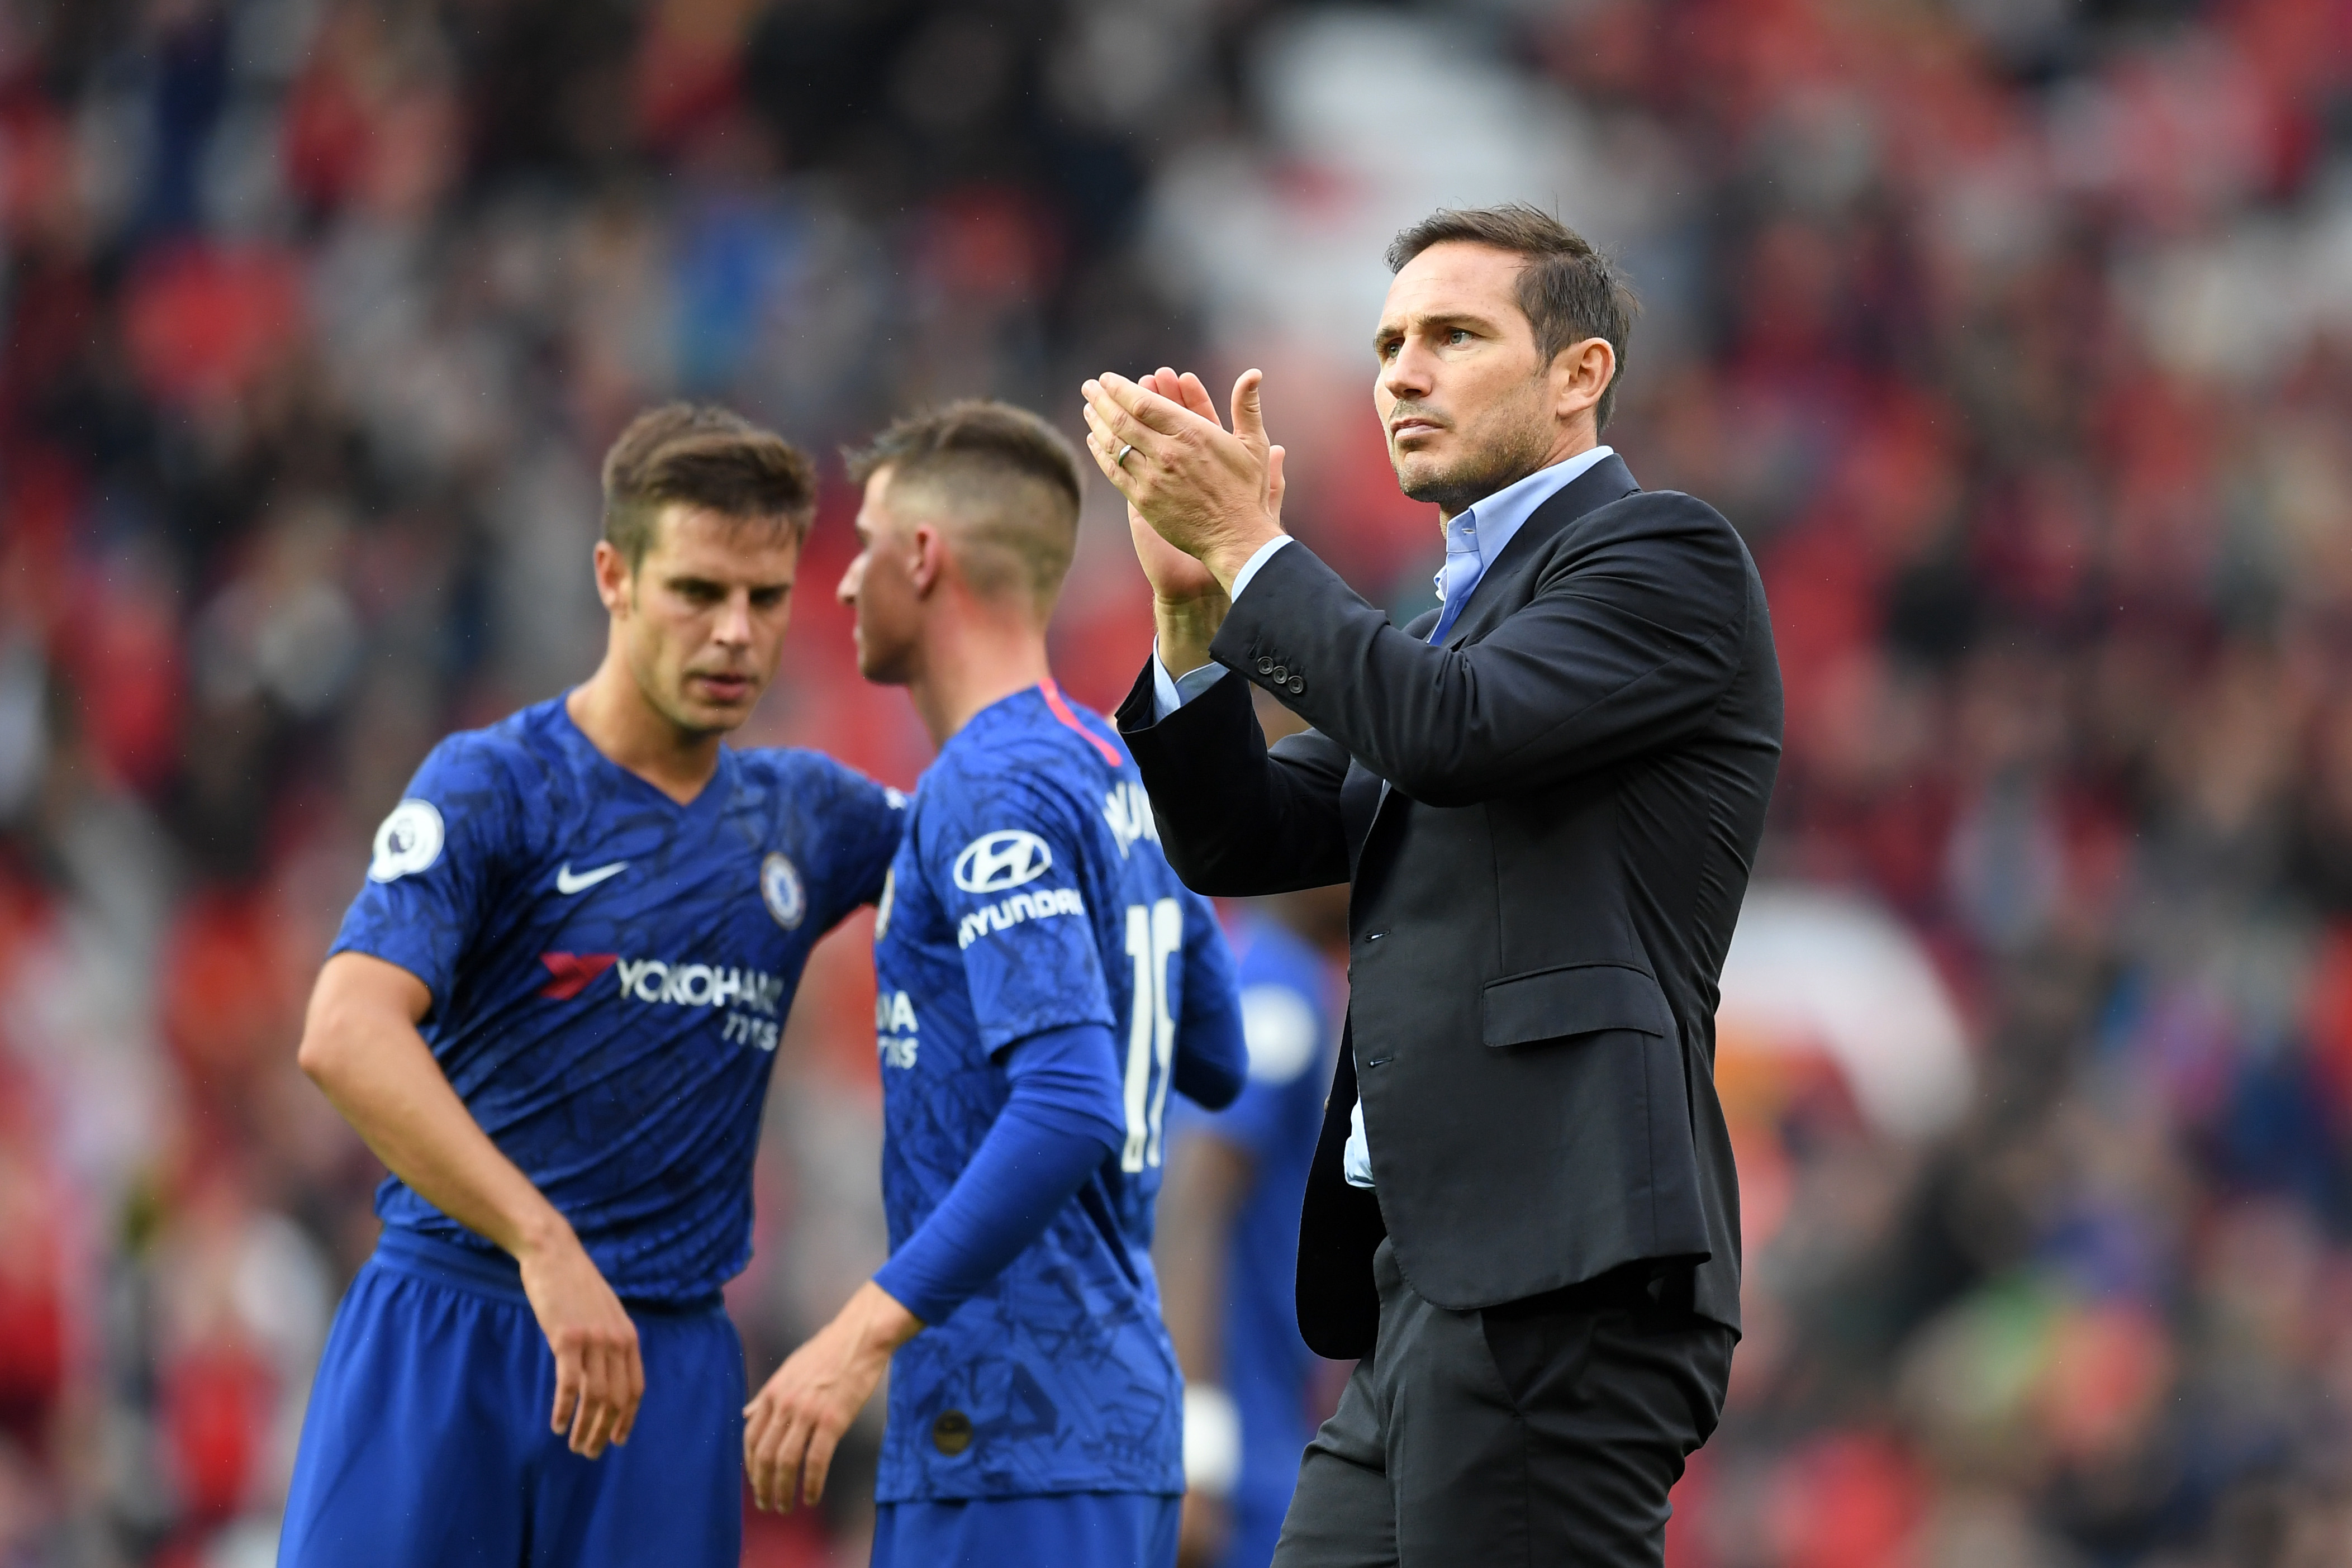 MANCHESTER, ENGLAND - AUGUST 11: Frank Lampard, Manager of Chelsea acknowledges the fans following his teams defeat in the Premier League match between Manchester United and Chelsea FC at Old Trafford on August 11, 2019 in Manchester, United Kingdom. (Photo by Michael Regan/Getty Images)